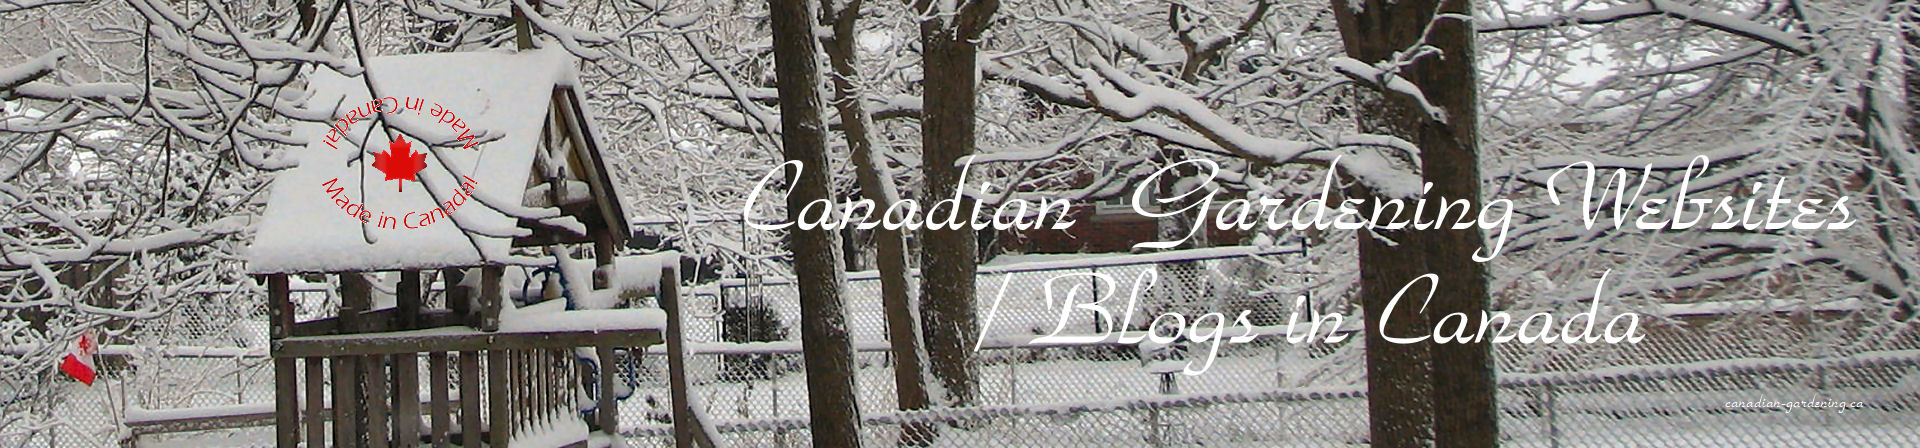 Canadian Gardening Websites and Blogs  logo in Canada